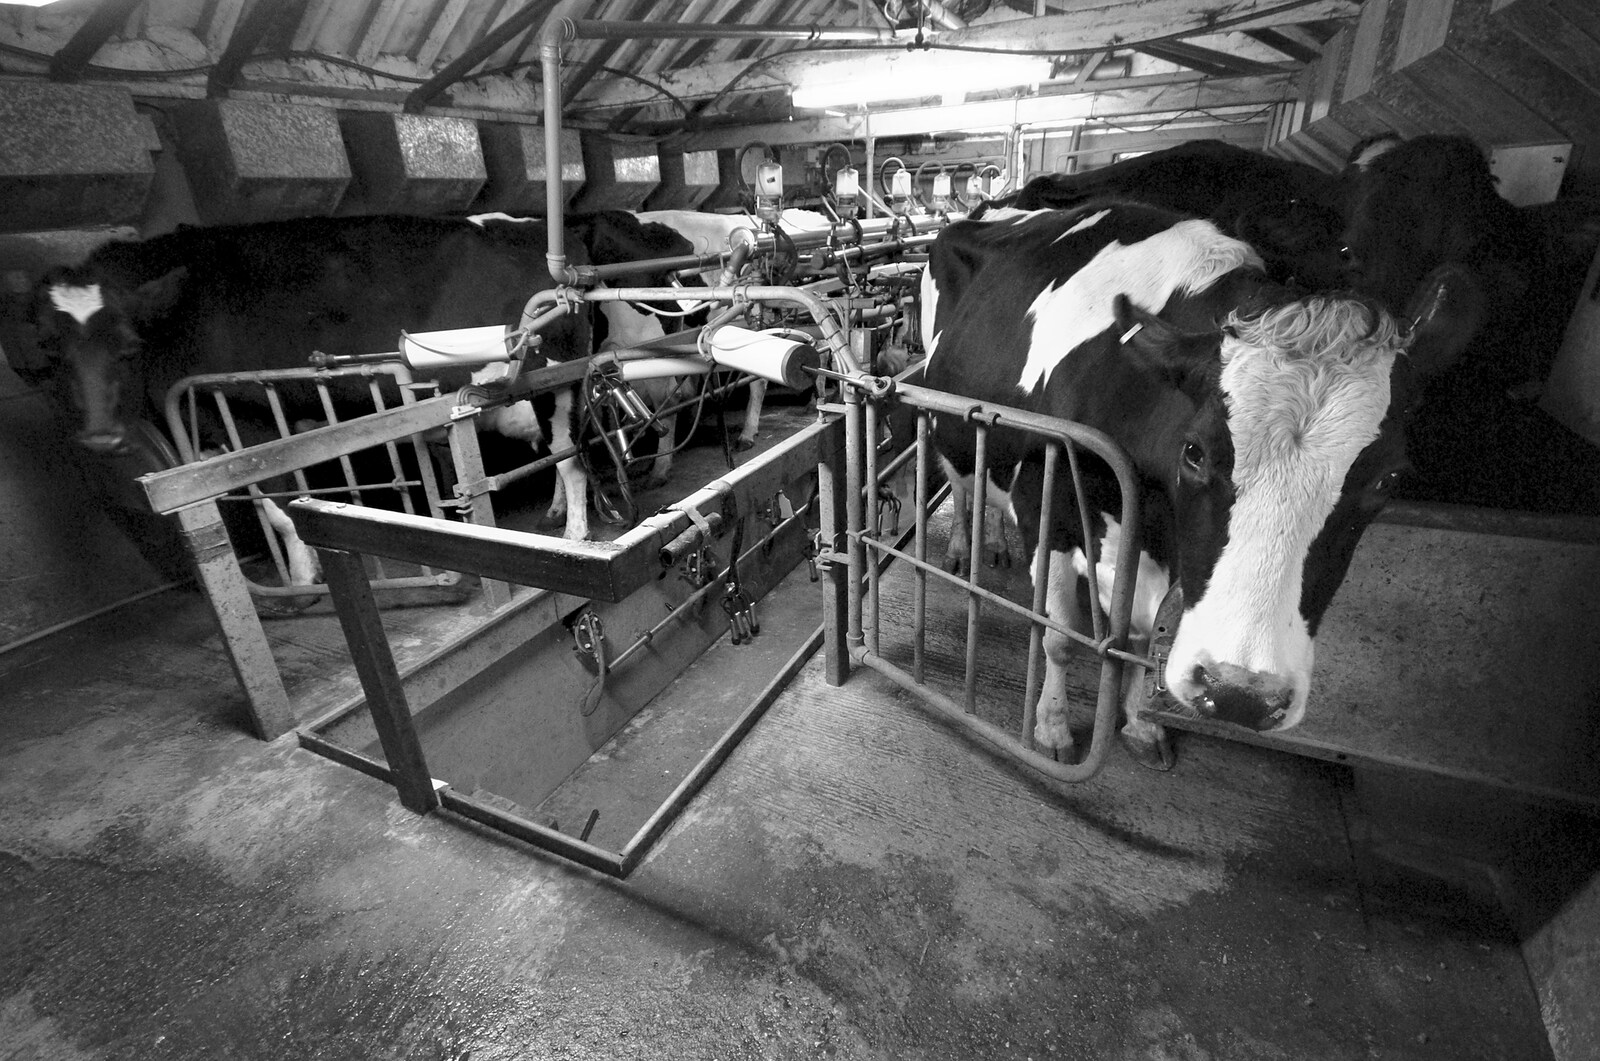 A cow looks up from The Last Milking at Dairy Farm, Thrandeston, Suffolk - 11th January 2007